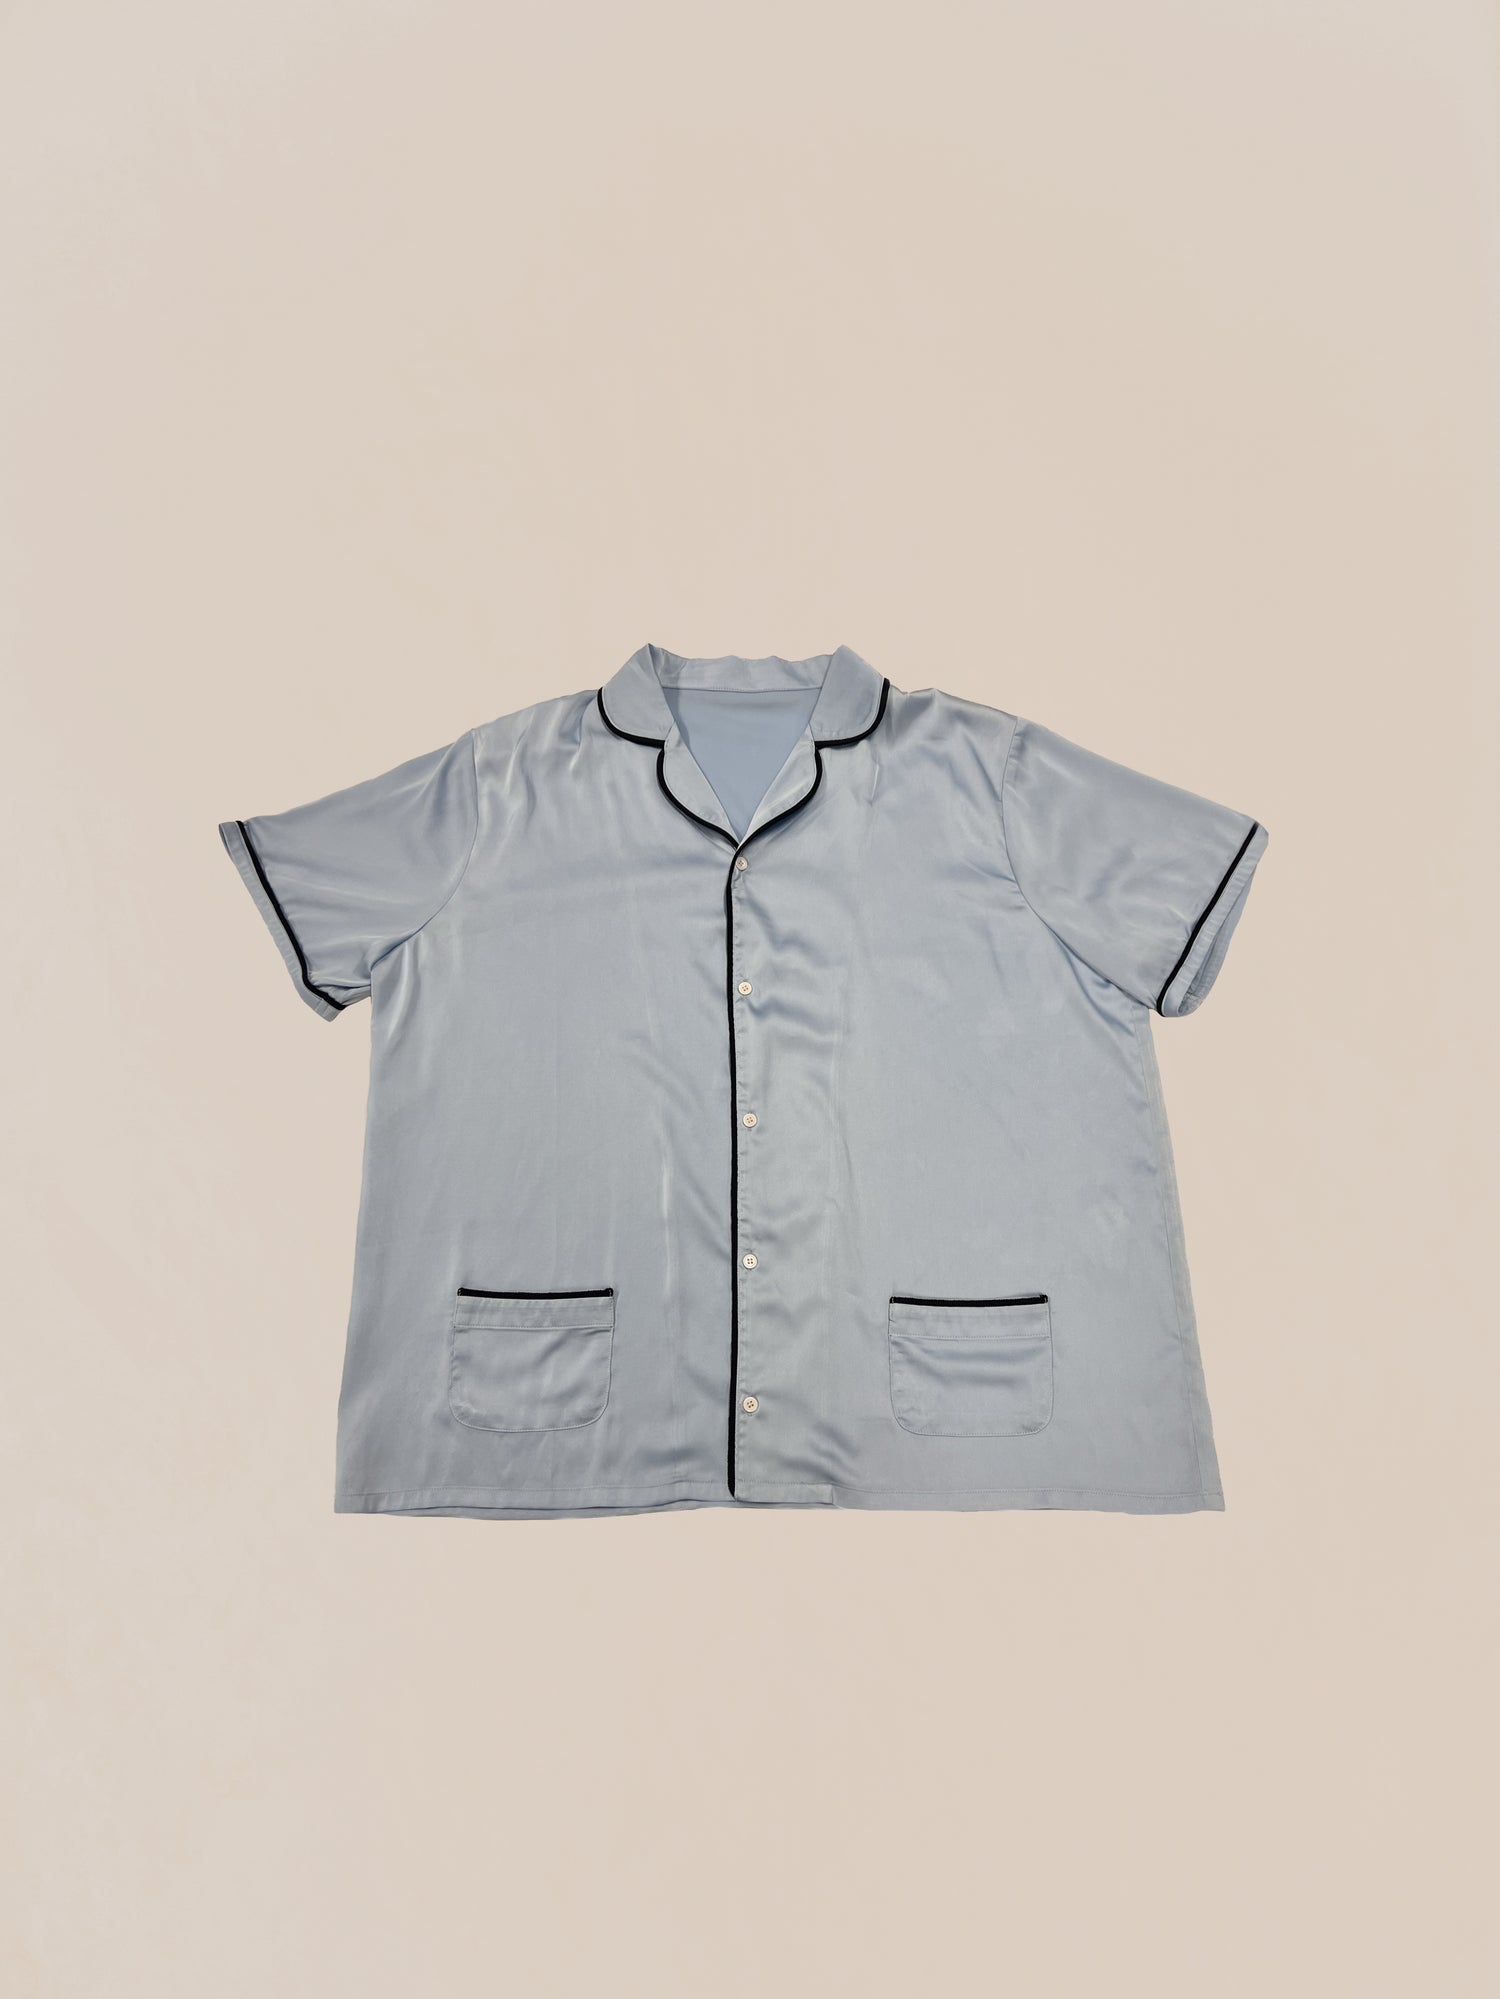 A Sample 61 (Light Blue Camp Shirt) made by Profound, with short sleeves and a collar, laid flat on a plain background as a pre-production sample.